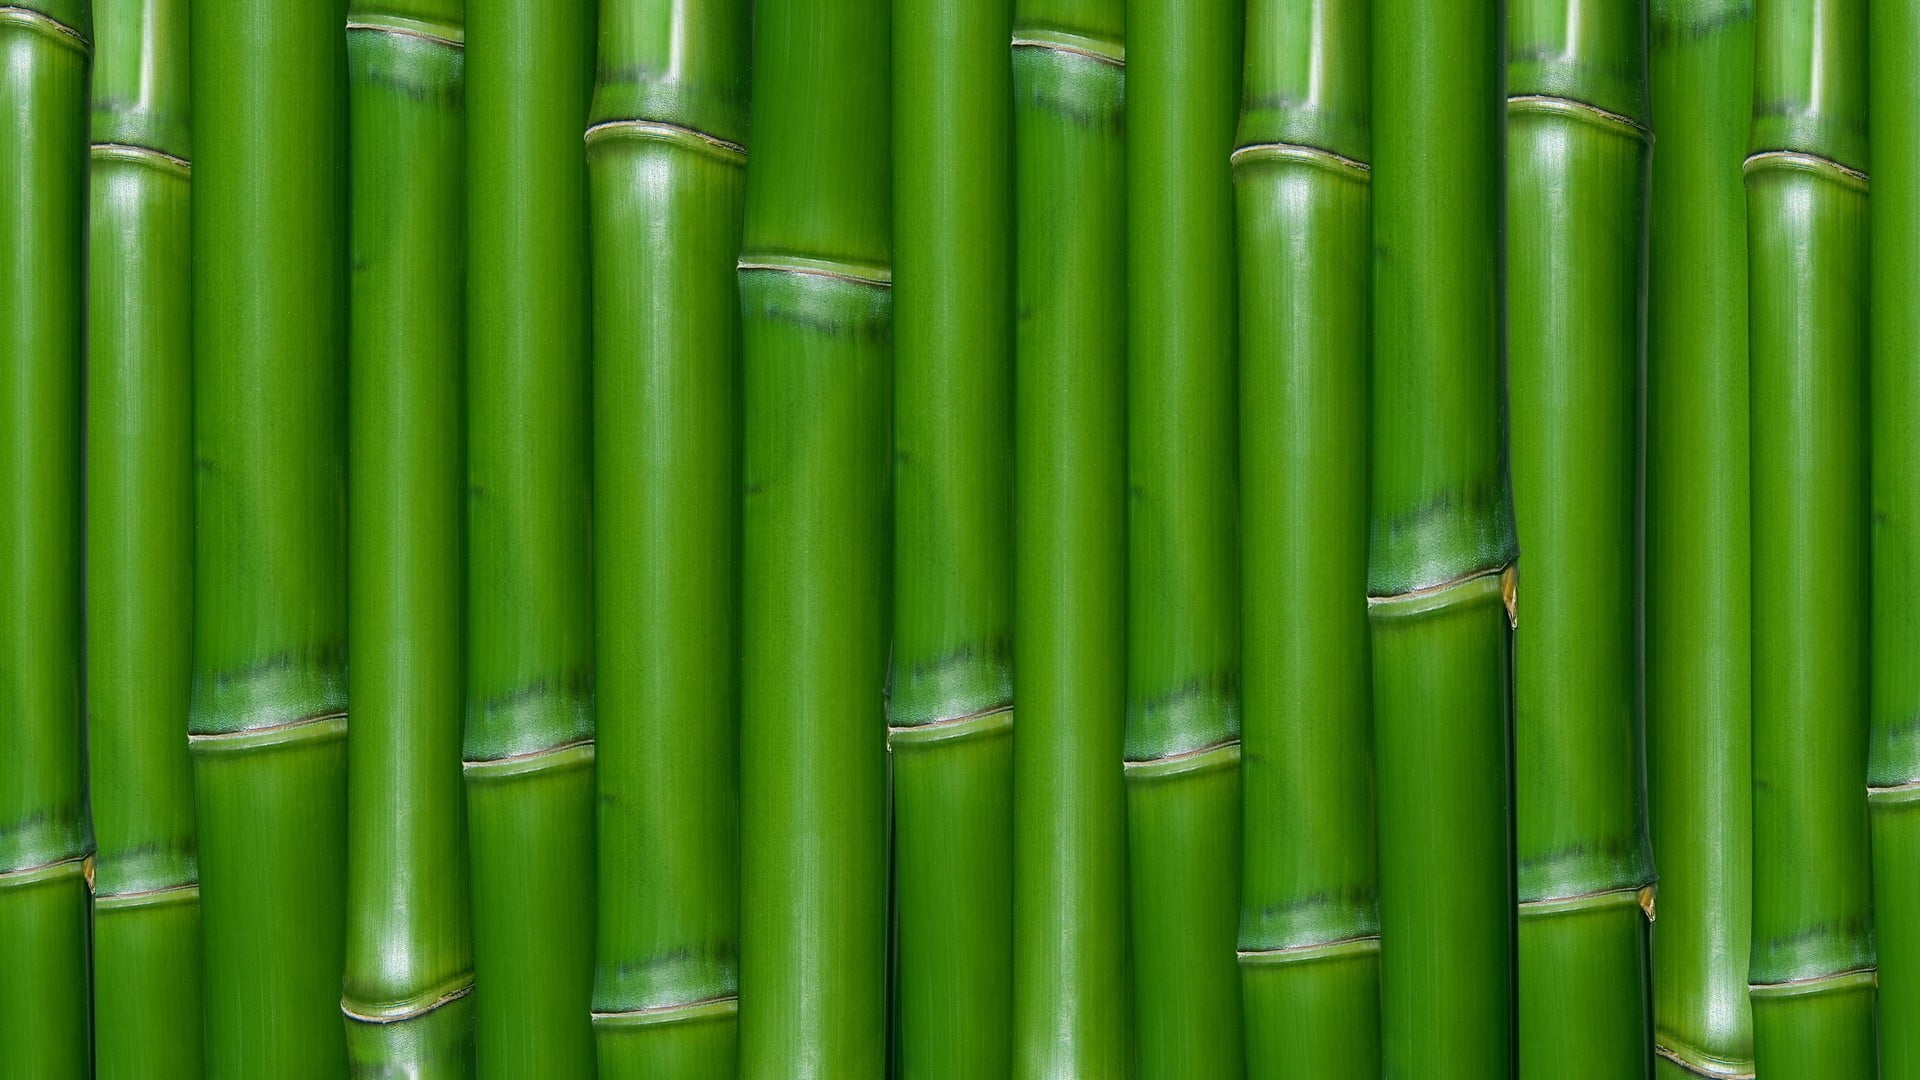 Download wallpaper for 3840x2400 resolution | Green fresh bamboo ...